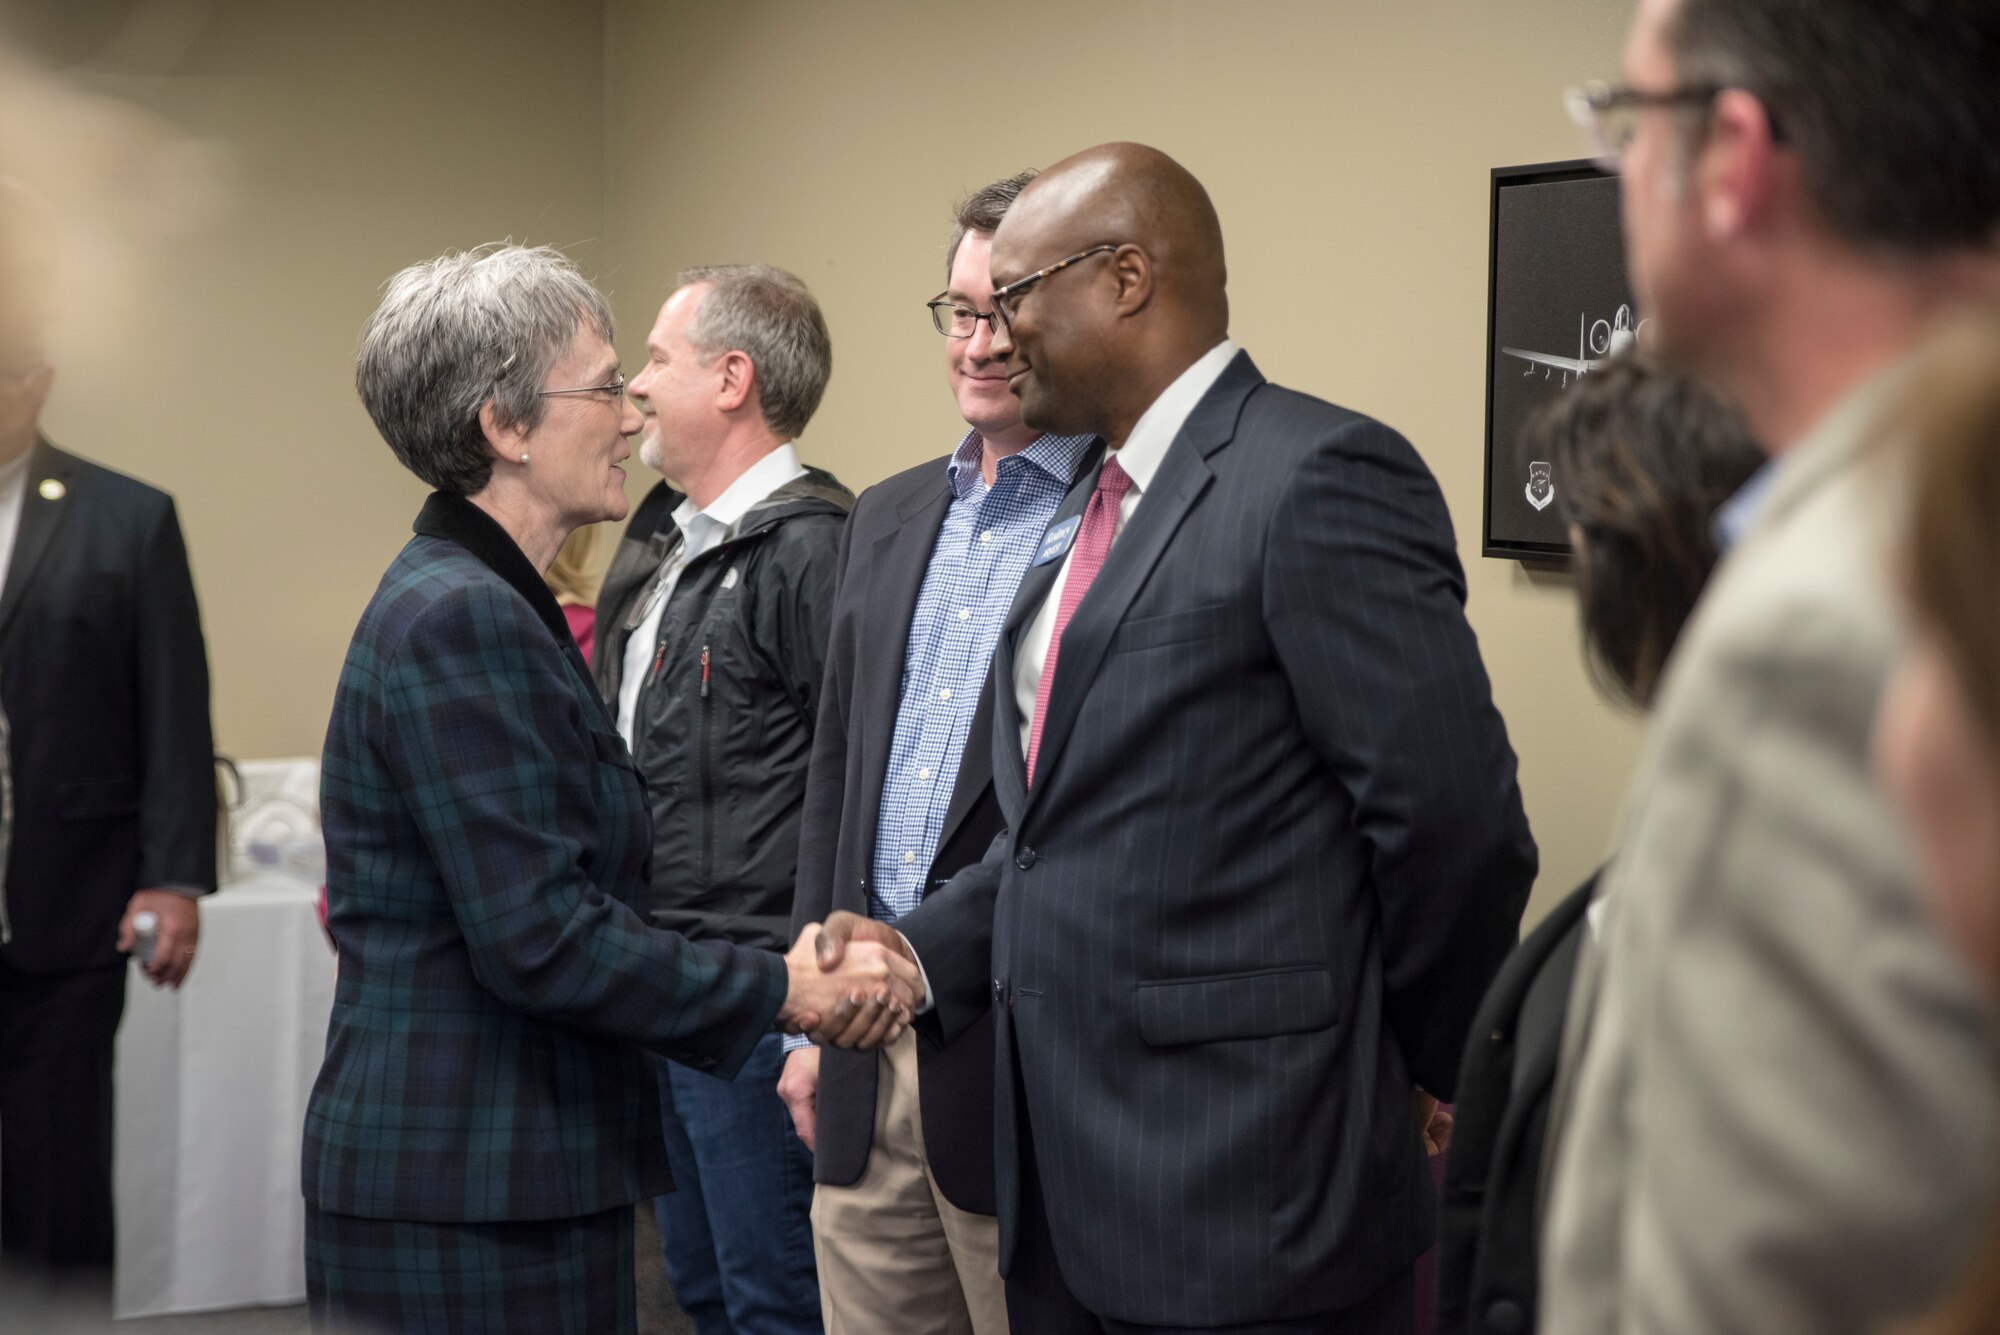 Secretary of the Air Force Heather Wilson (left) shakes hands with a member of Fort Smith’s Civil leaders during a meet and greet at Ebbing Air National Guard Base, Fort Smith, Ark., Mar. 26 , 2018.  Wilson spoke highly of the Wing’s success and thank civil leaders for their perpetual support.  (U.S. Air National Guard photo by Senior Airman Matthew Matlock)